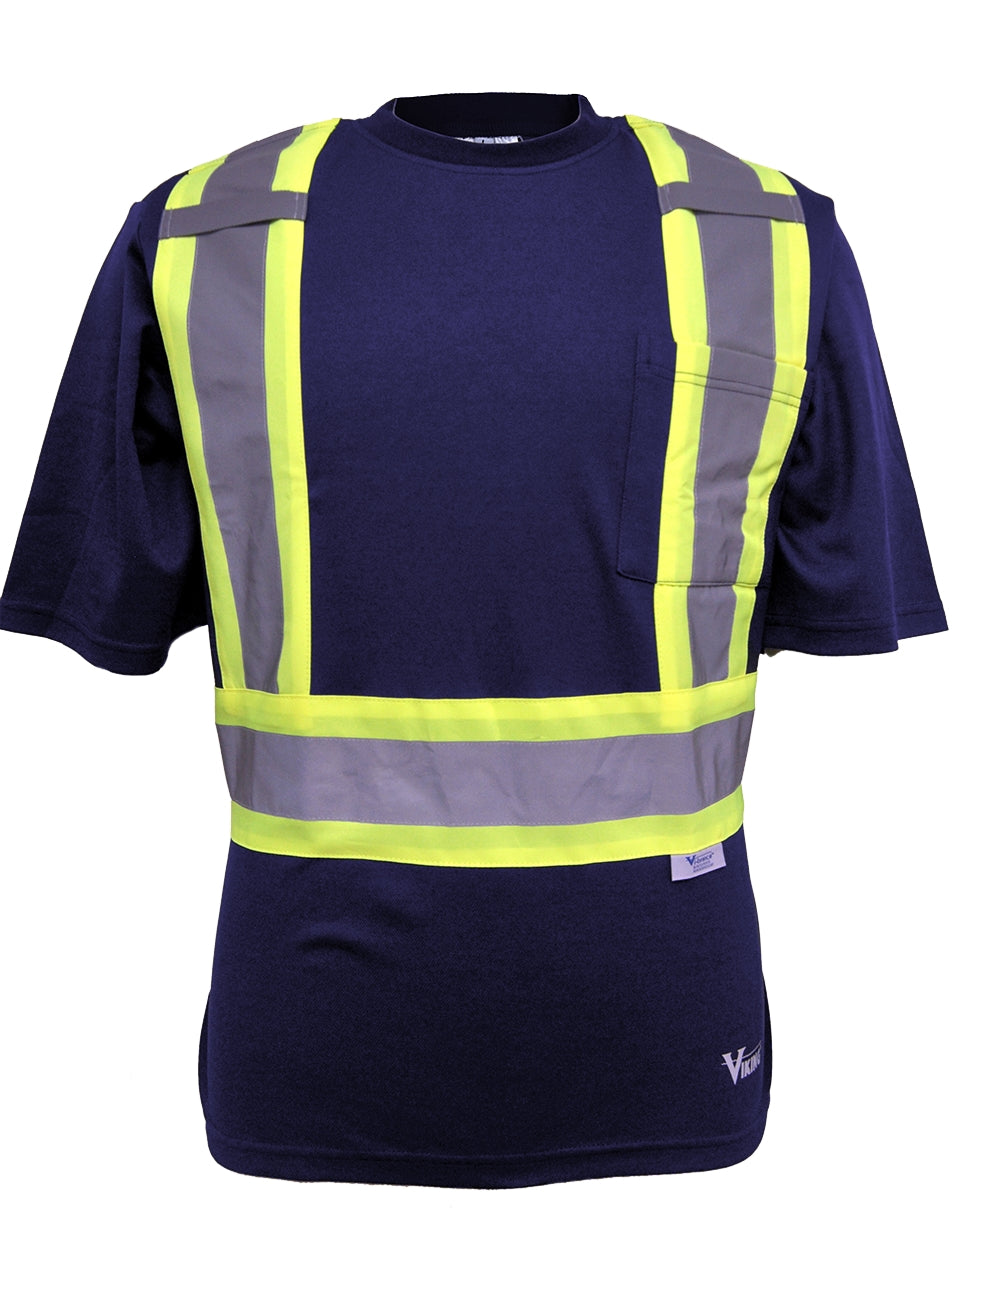 High Visibility - Safety T-shirt (2 options)